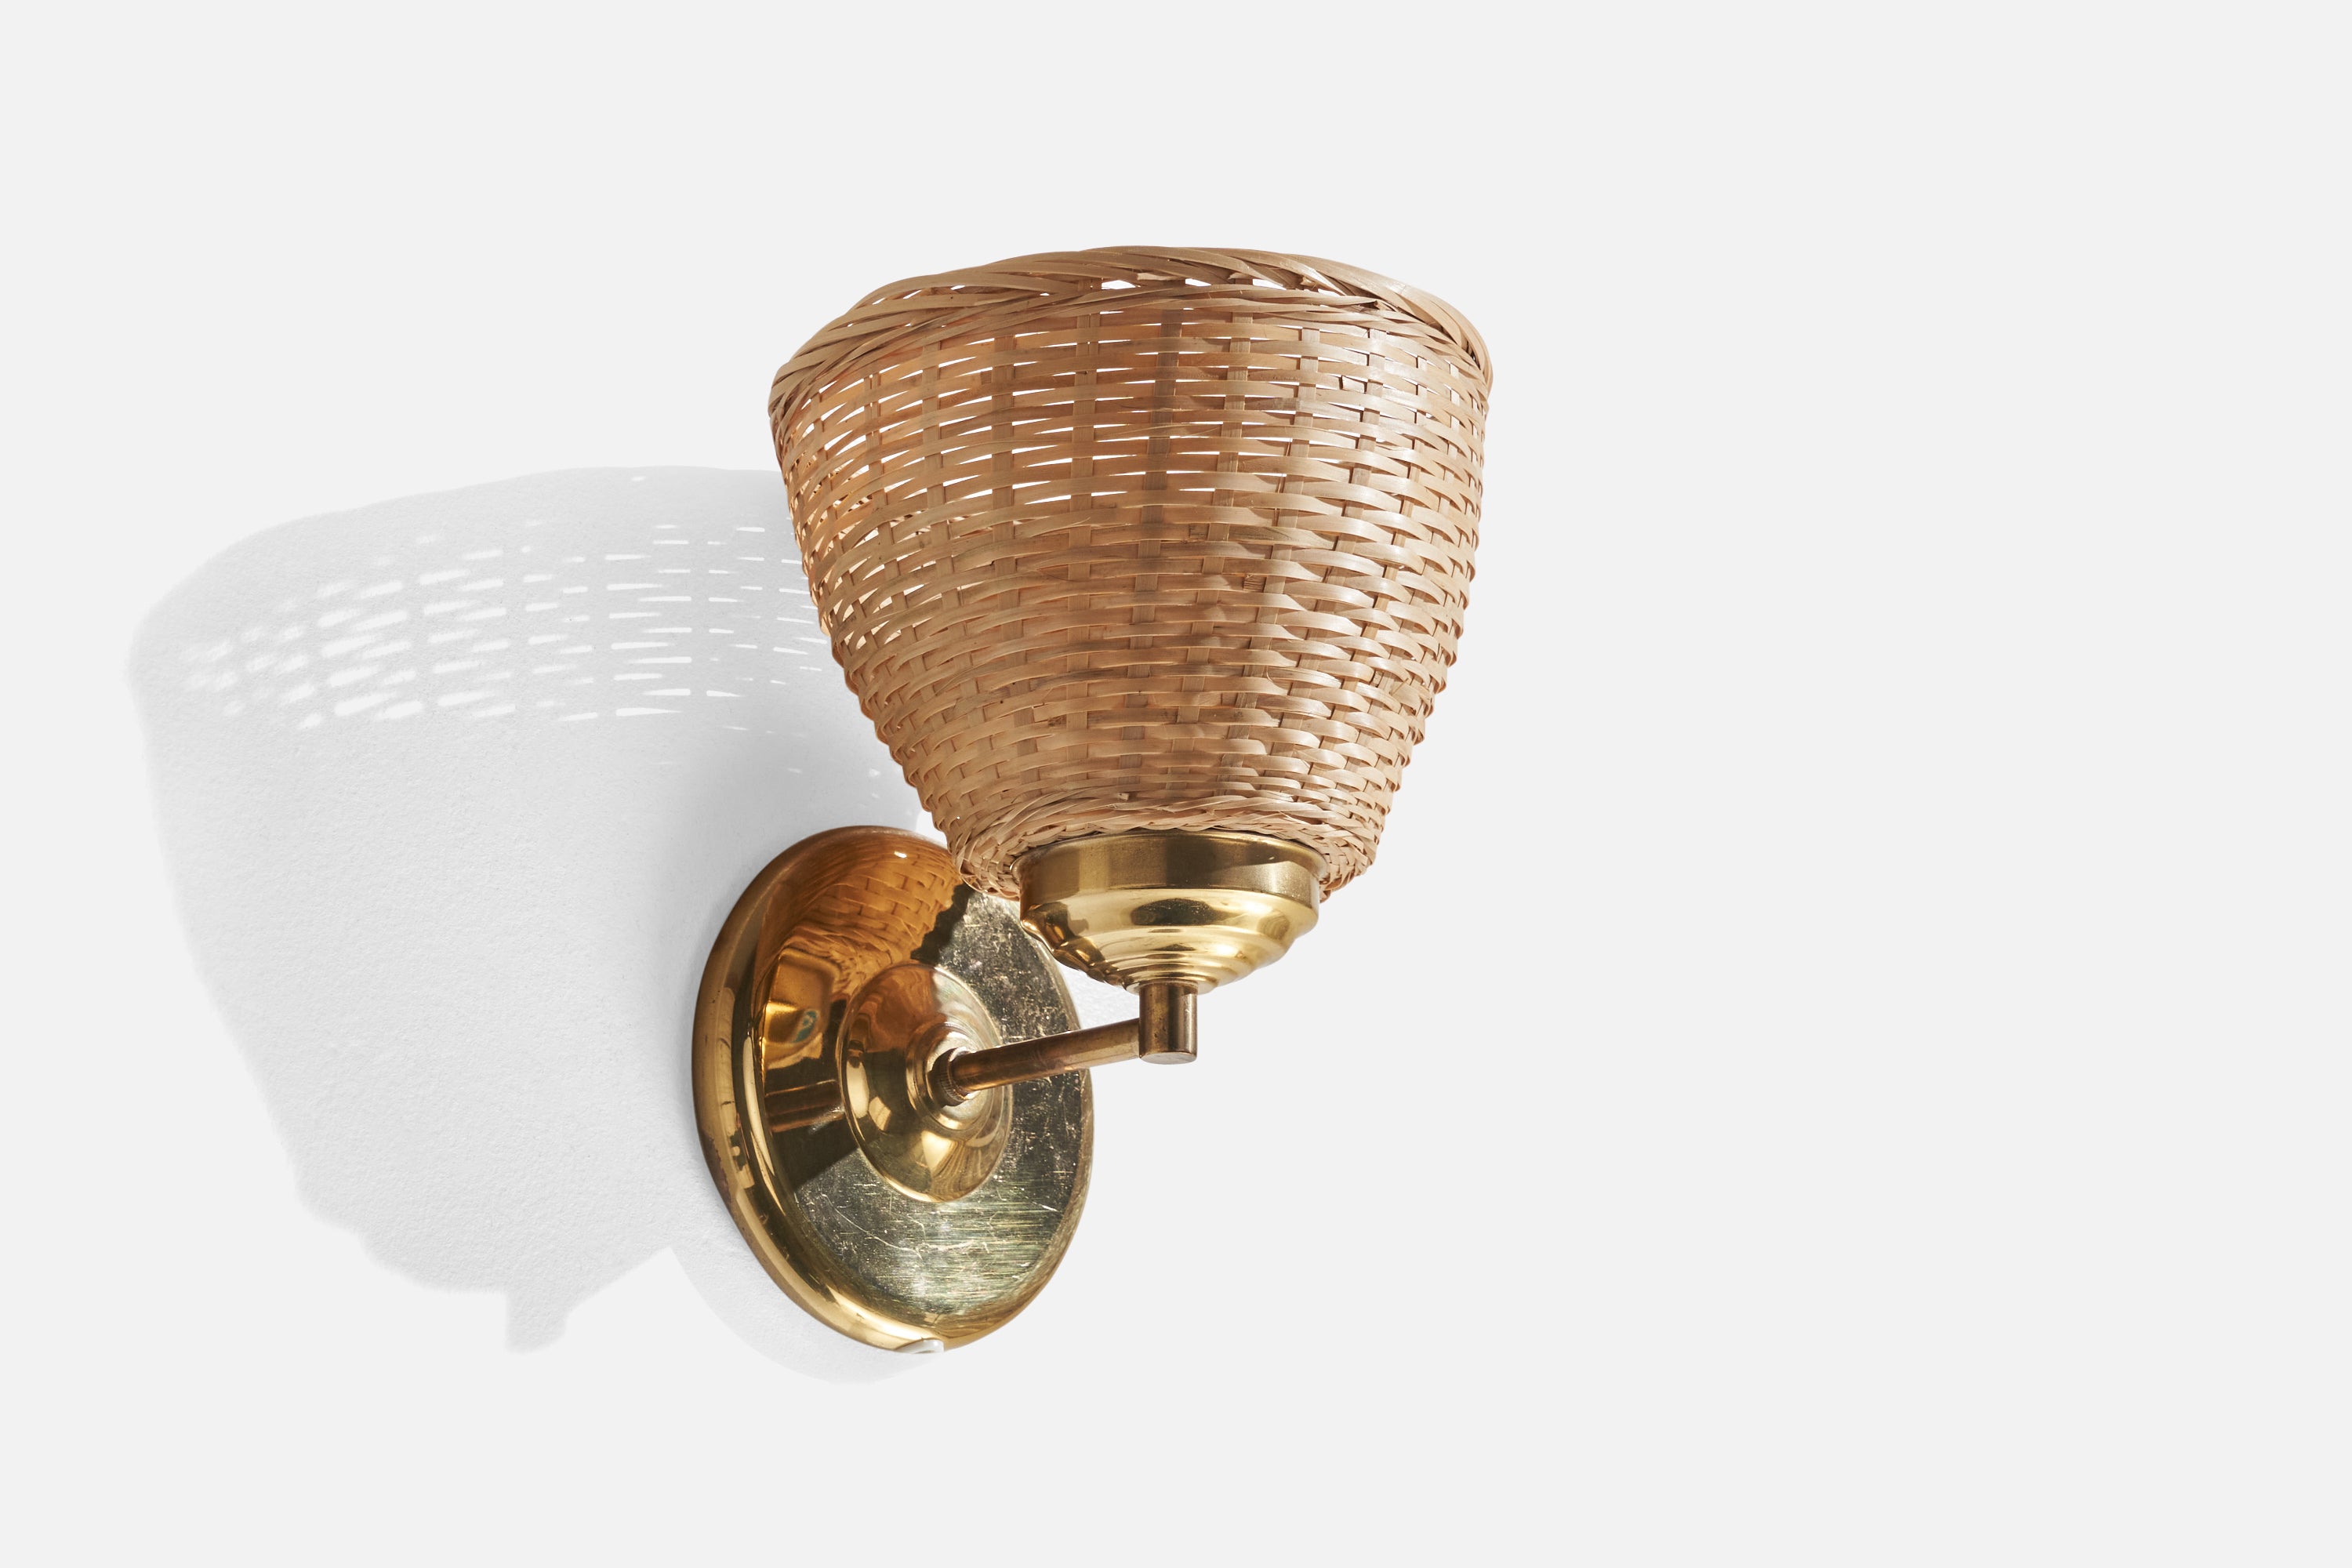 A brass and rattan wall light designed and produced in Sweden, c. 1970s.

Overall Dimensions (inches): 8.75” H x 7.15”  W x 7”  D
Back Plate Dimensions (inches): 5.05” H x 0.8” D
Bulb Specifications: E-26 Bulb
Number of Sockets: 1
All lighting will